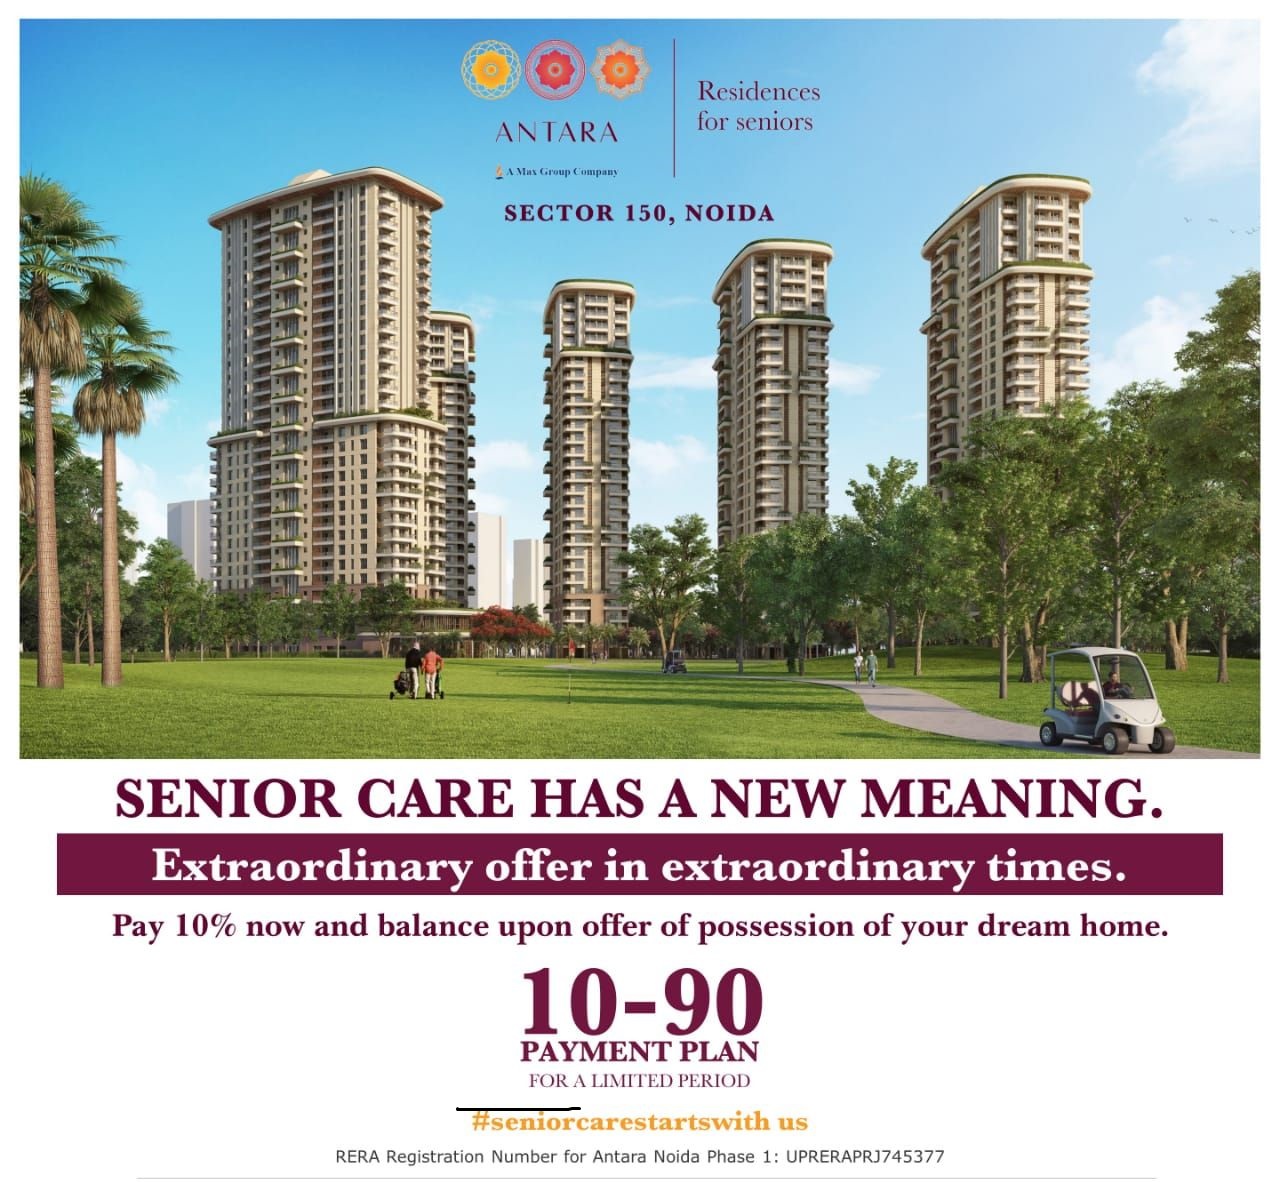 Pay 10% now and 90% on possession at Antara Residences, Noida Update